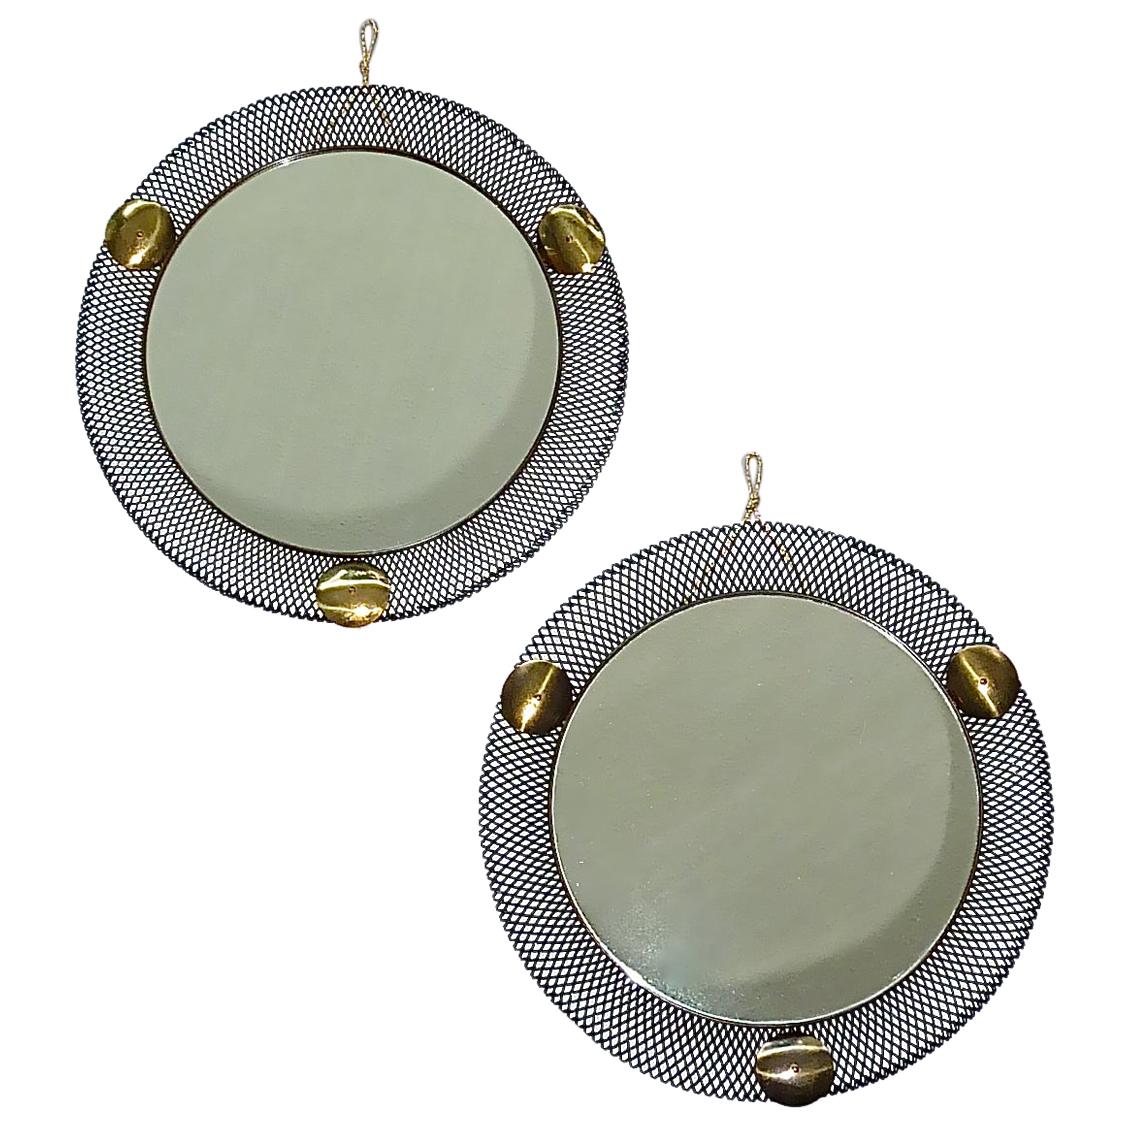 Pair Round Midcentury Wall Mirrors Brass Black Stretched Metal 1955 Mategot Biny